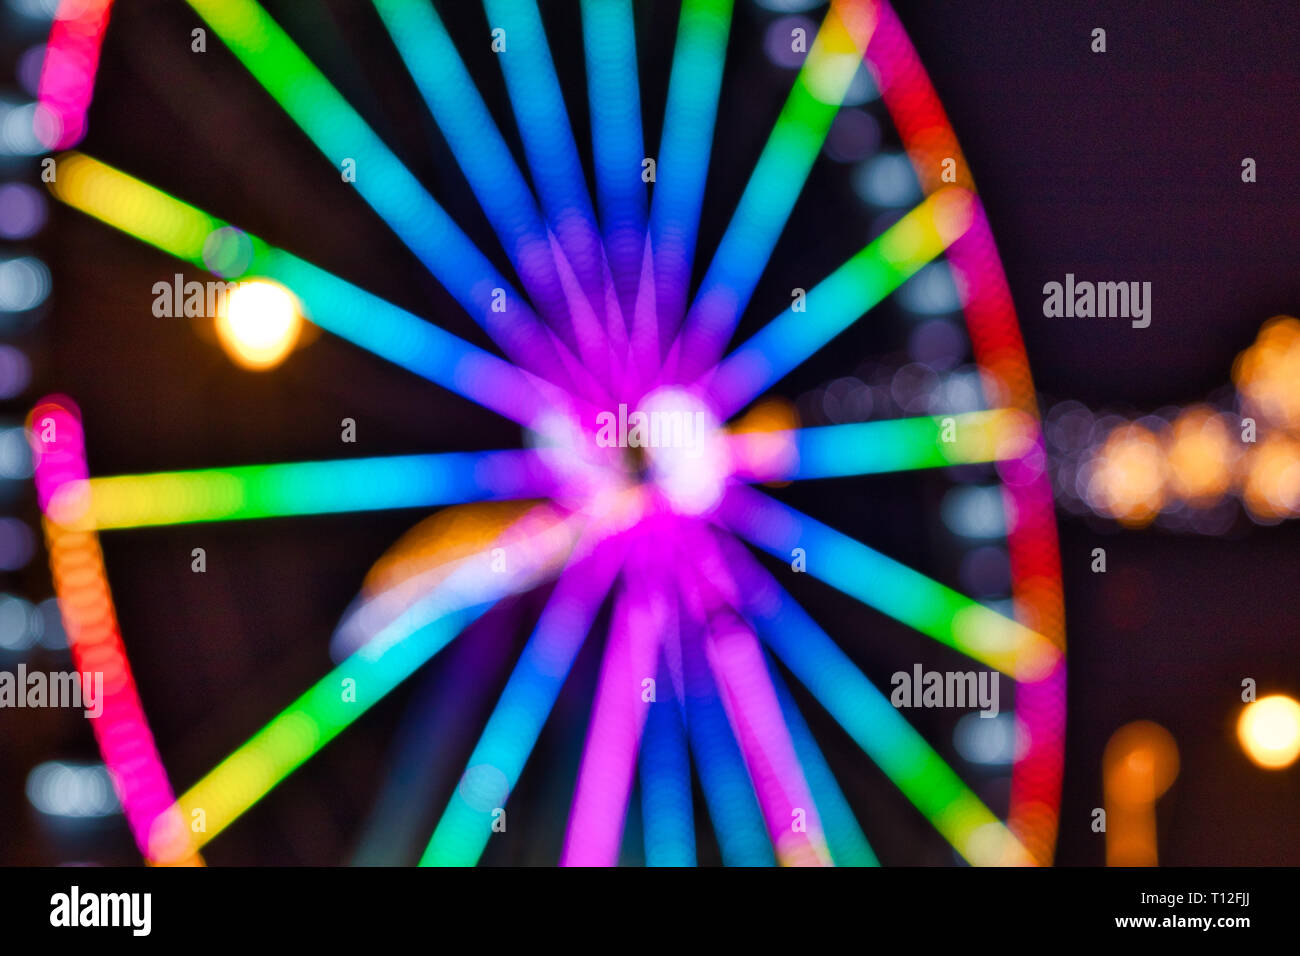 An out-of-focus shot of a colorful illuminated ferris wheel Stock Photo